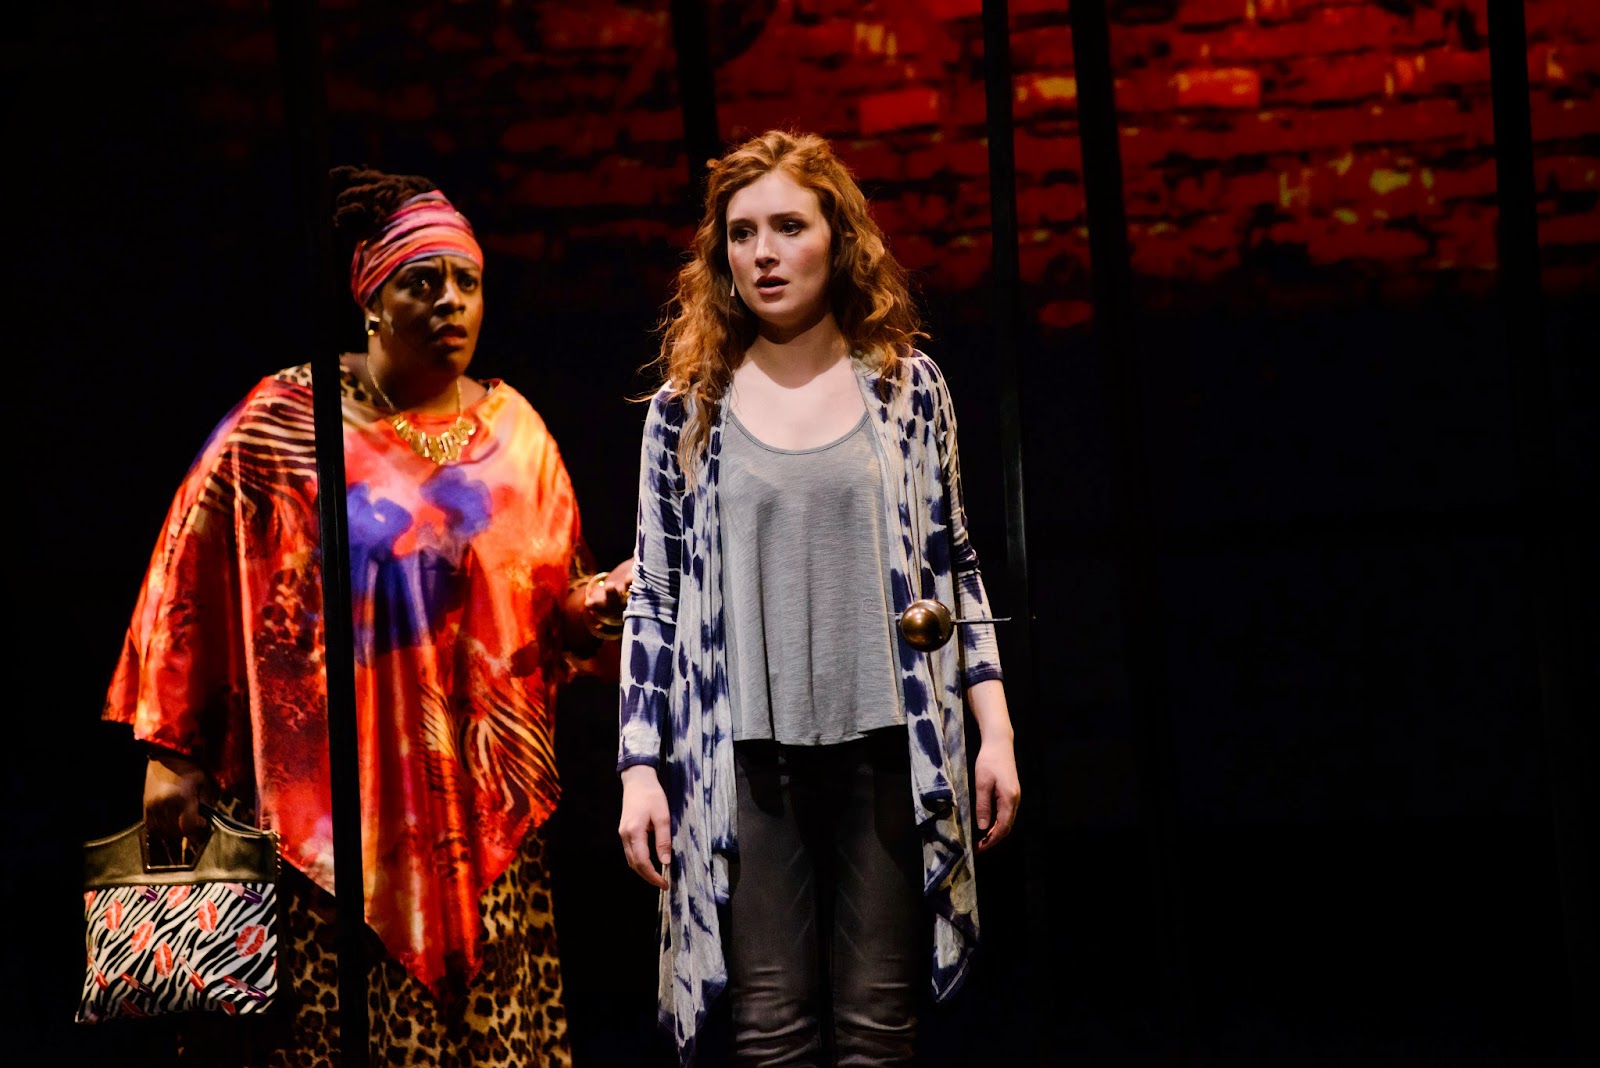 Tamara Anderson as Oda Mae Brown with Anna Giordano as Molly in GHOST. Photo by Maura McConnell.